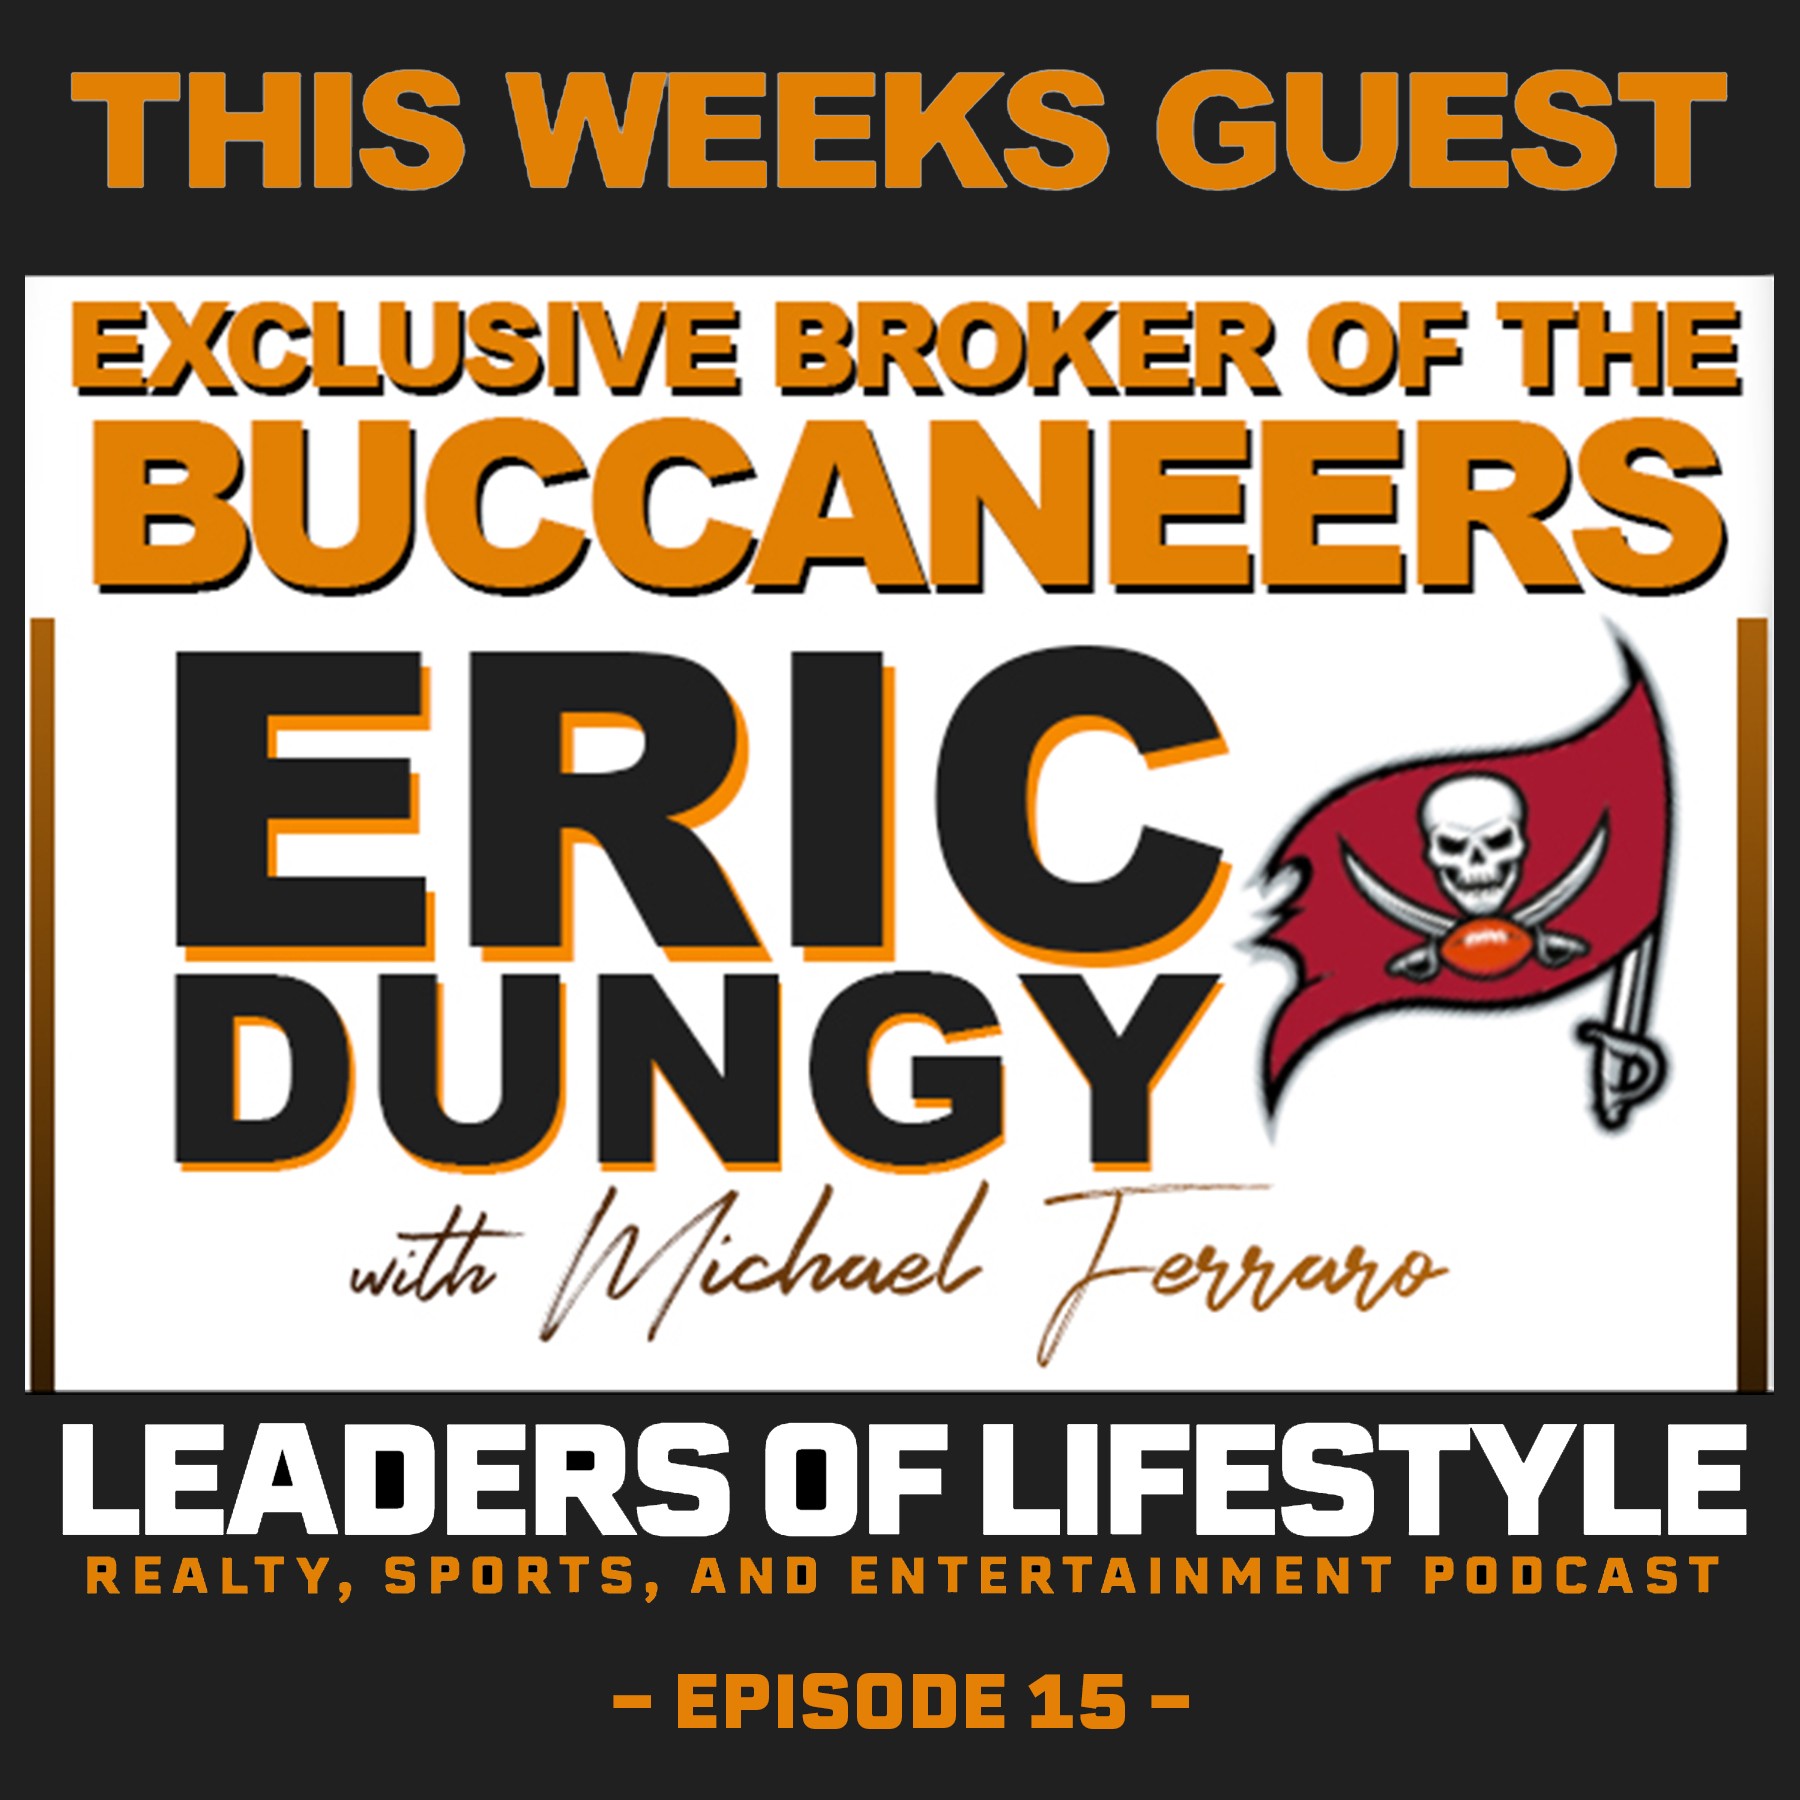 Artwork for podcast Leaders of Lifestyle